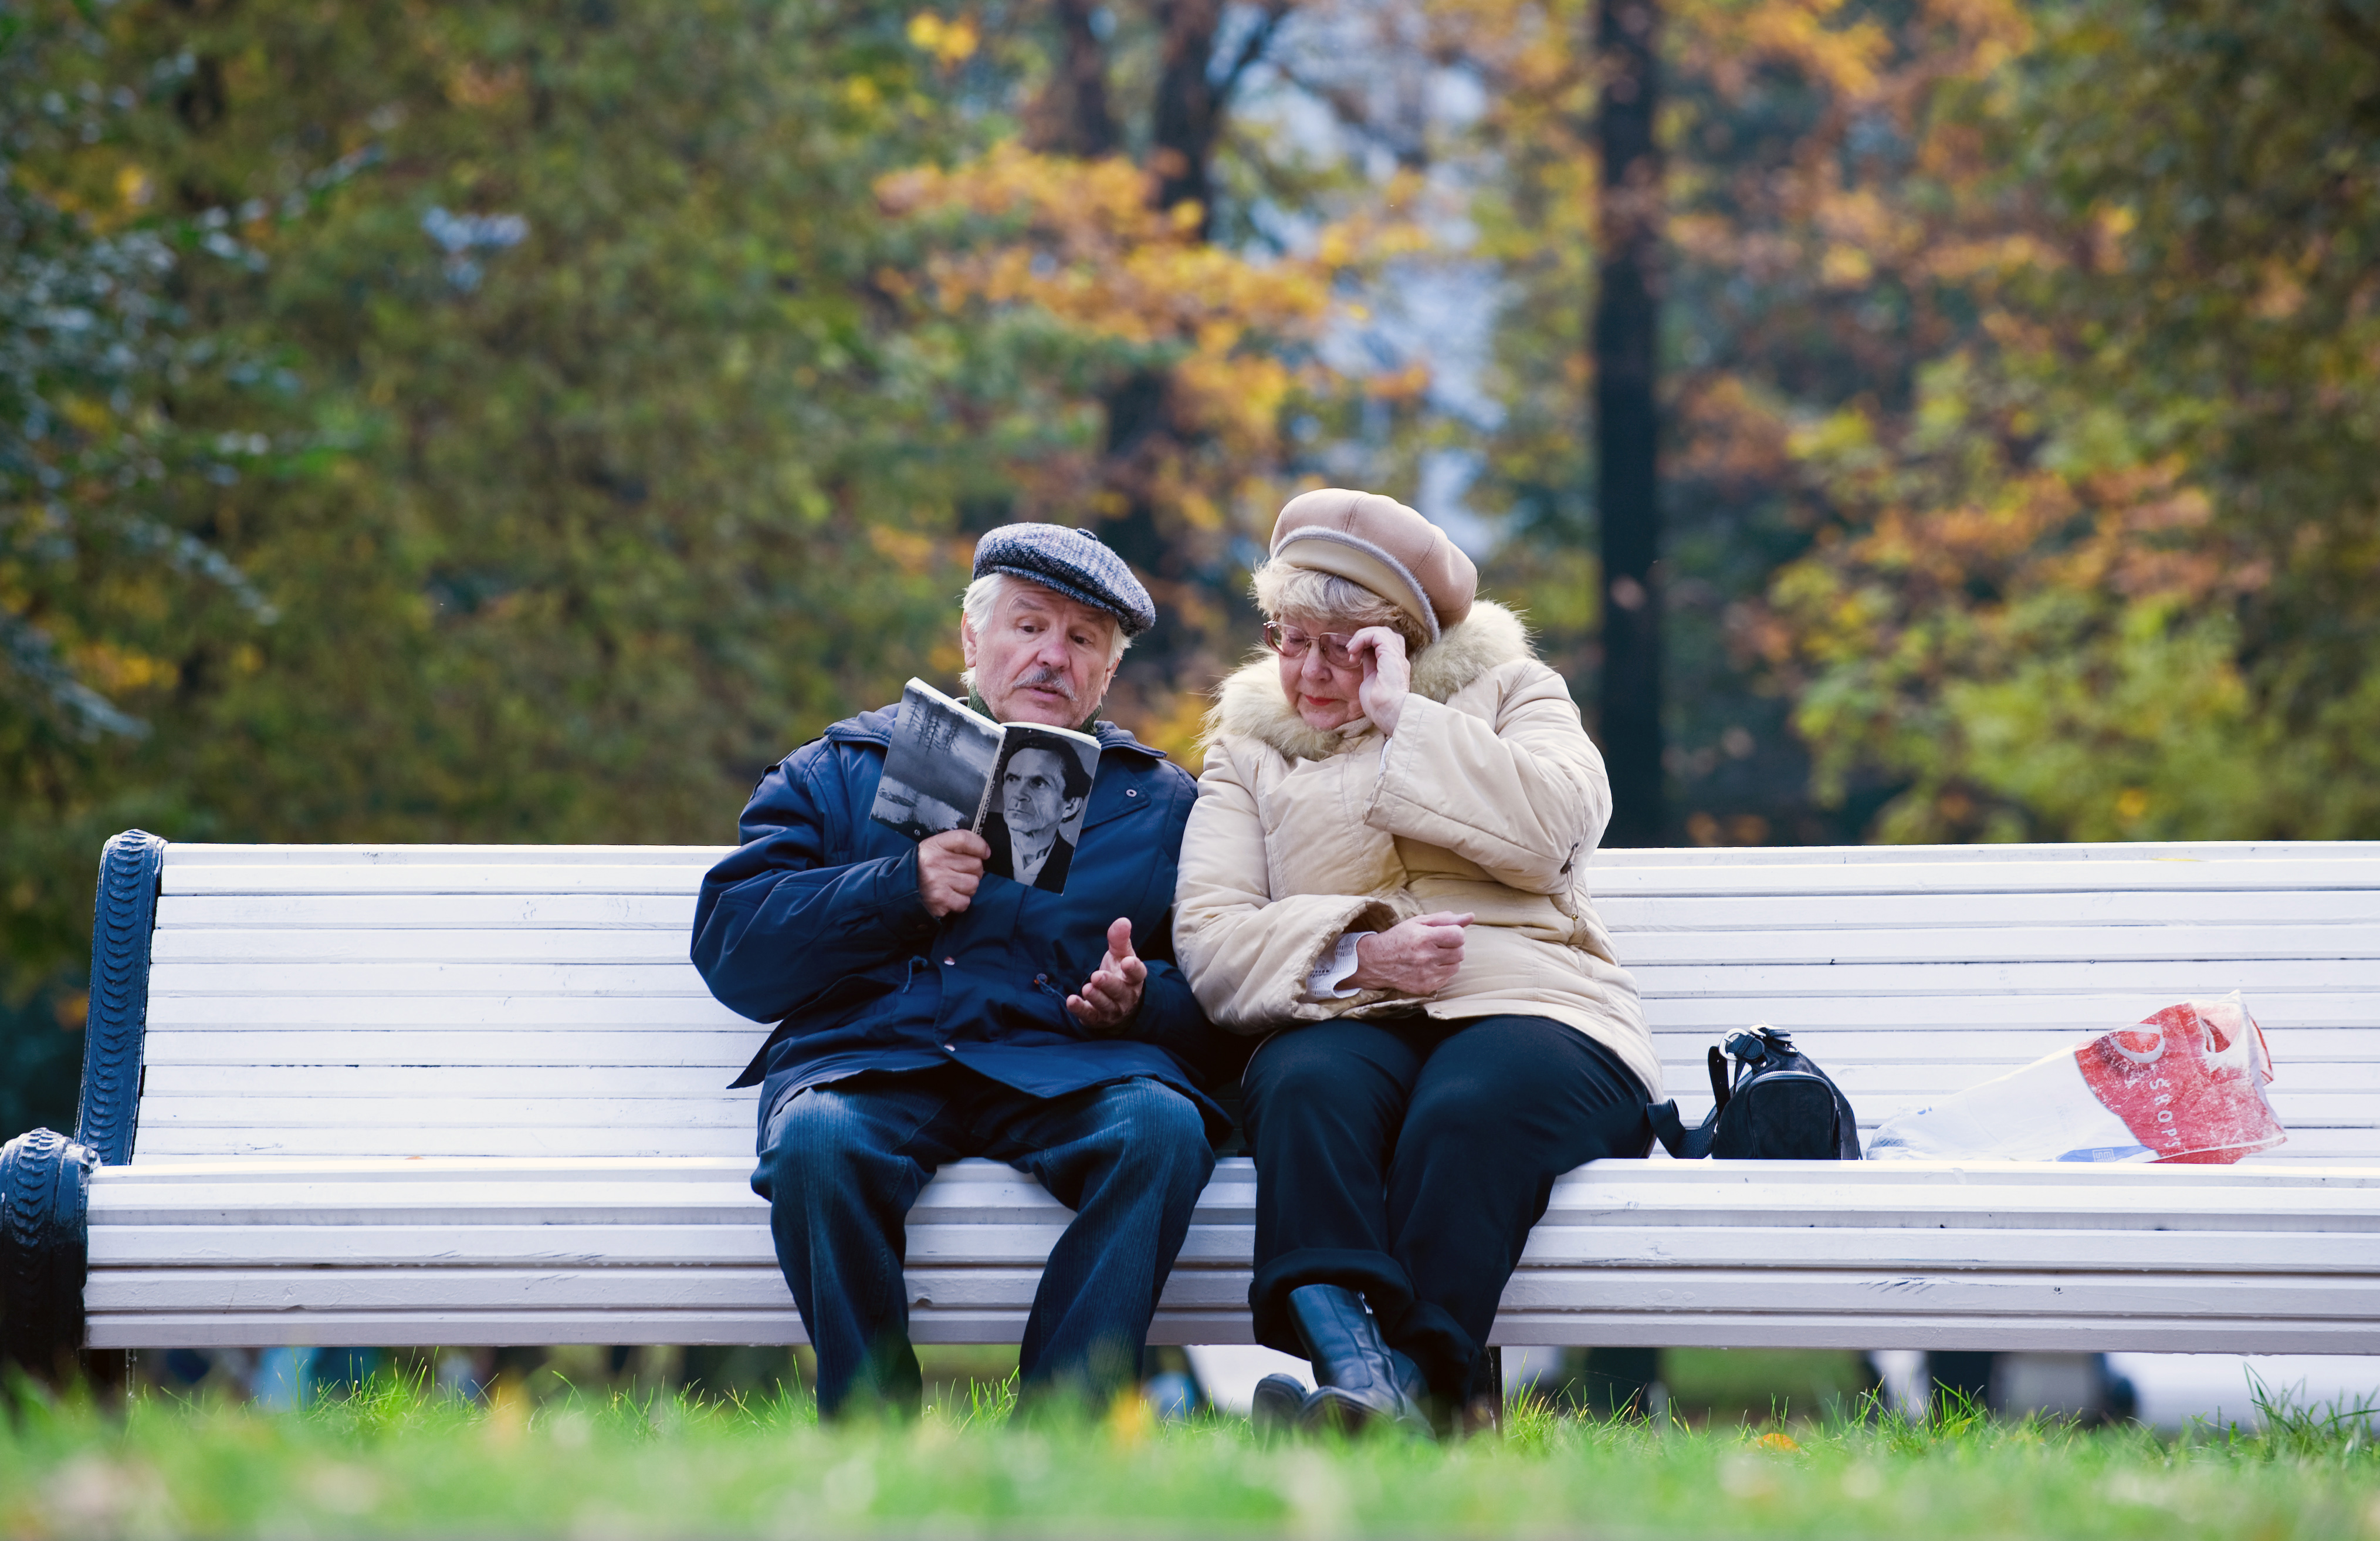 Elderly man and woman in coats read a book on a bench with trees in background